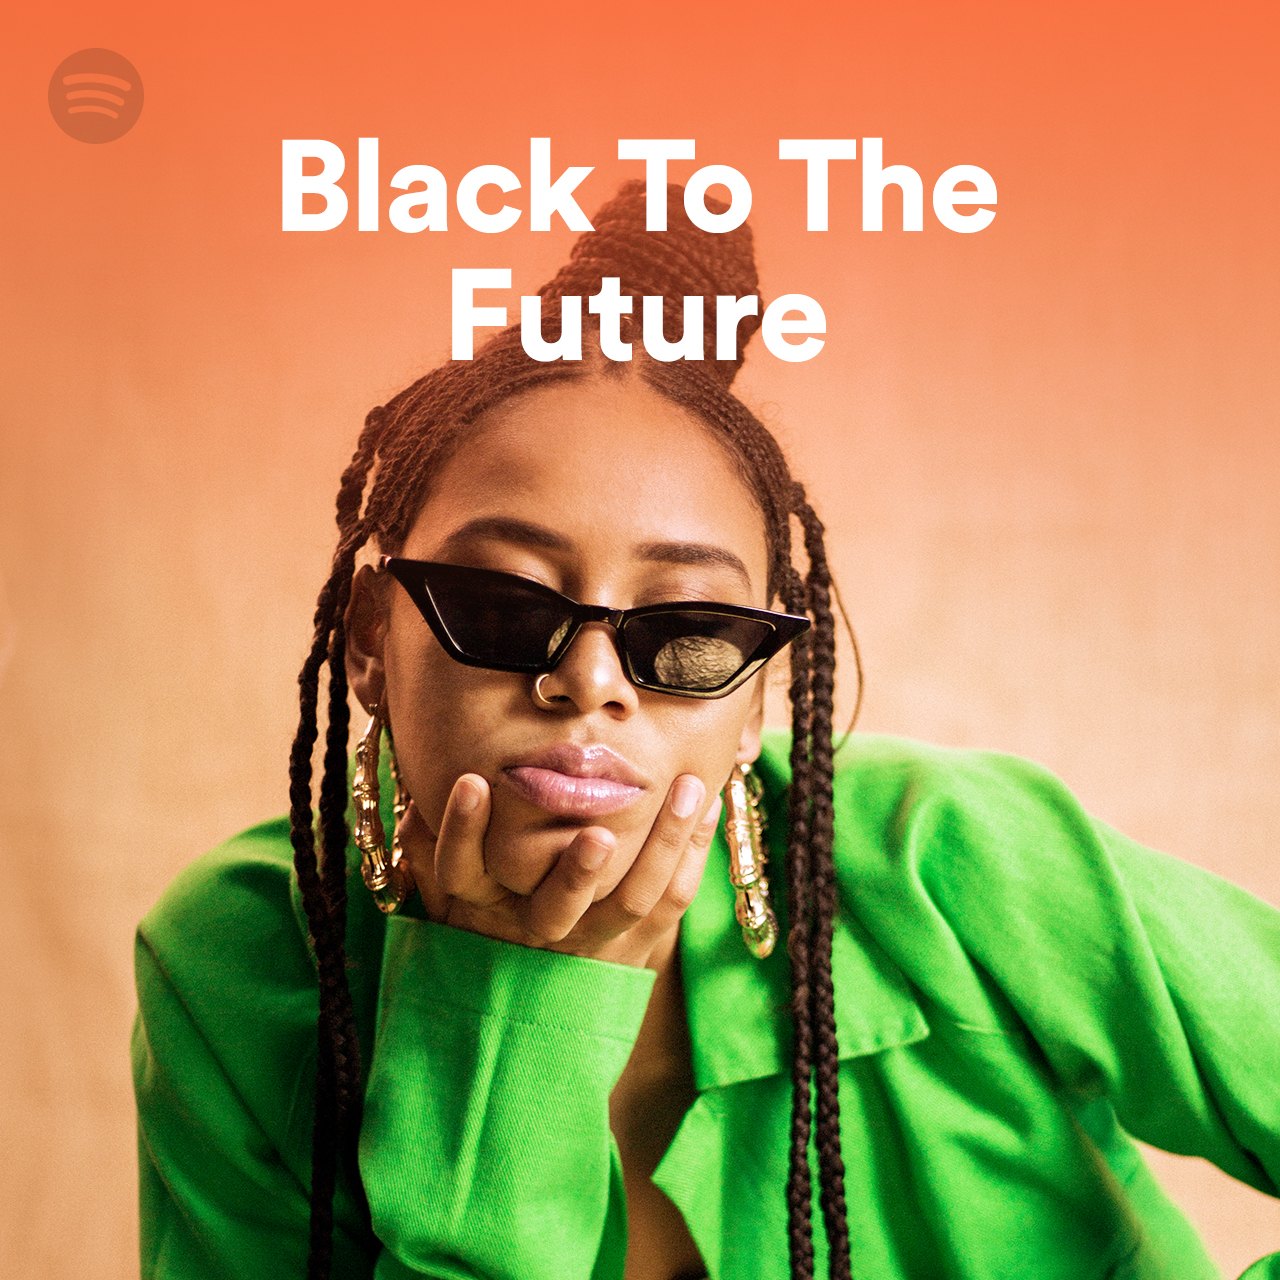 Spotify rolls out Black Music Month Initiatives featuring Sho Madjozi and Nasty C